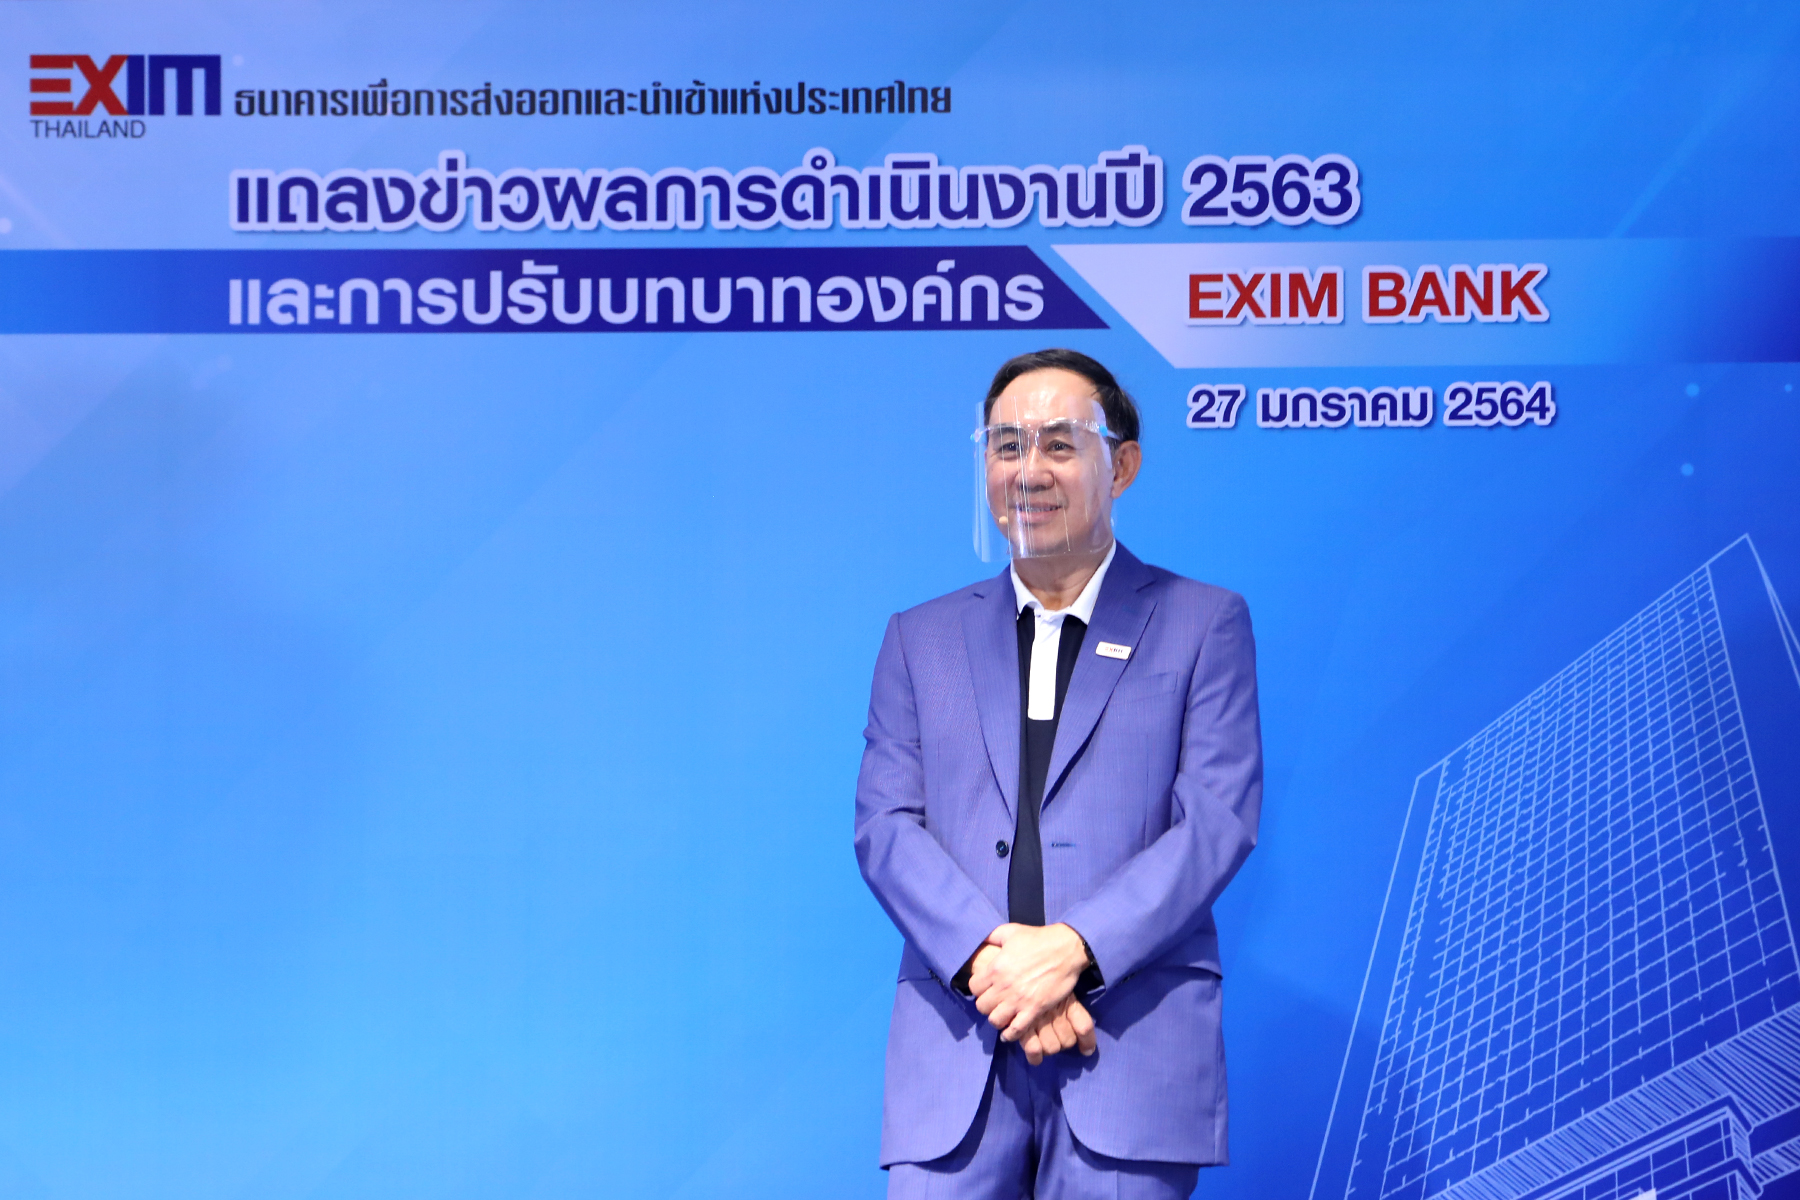 EXIM Thailand Announces 2020 Operating Results Showing 5-year Frog-leap High Growth